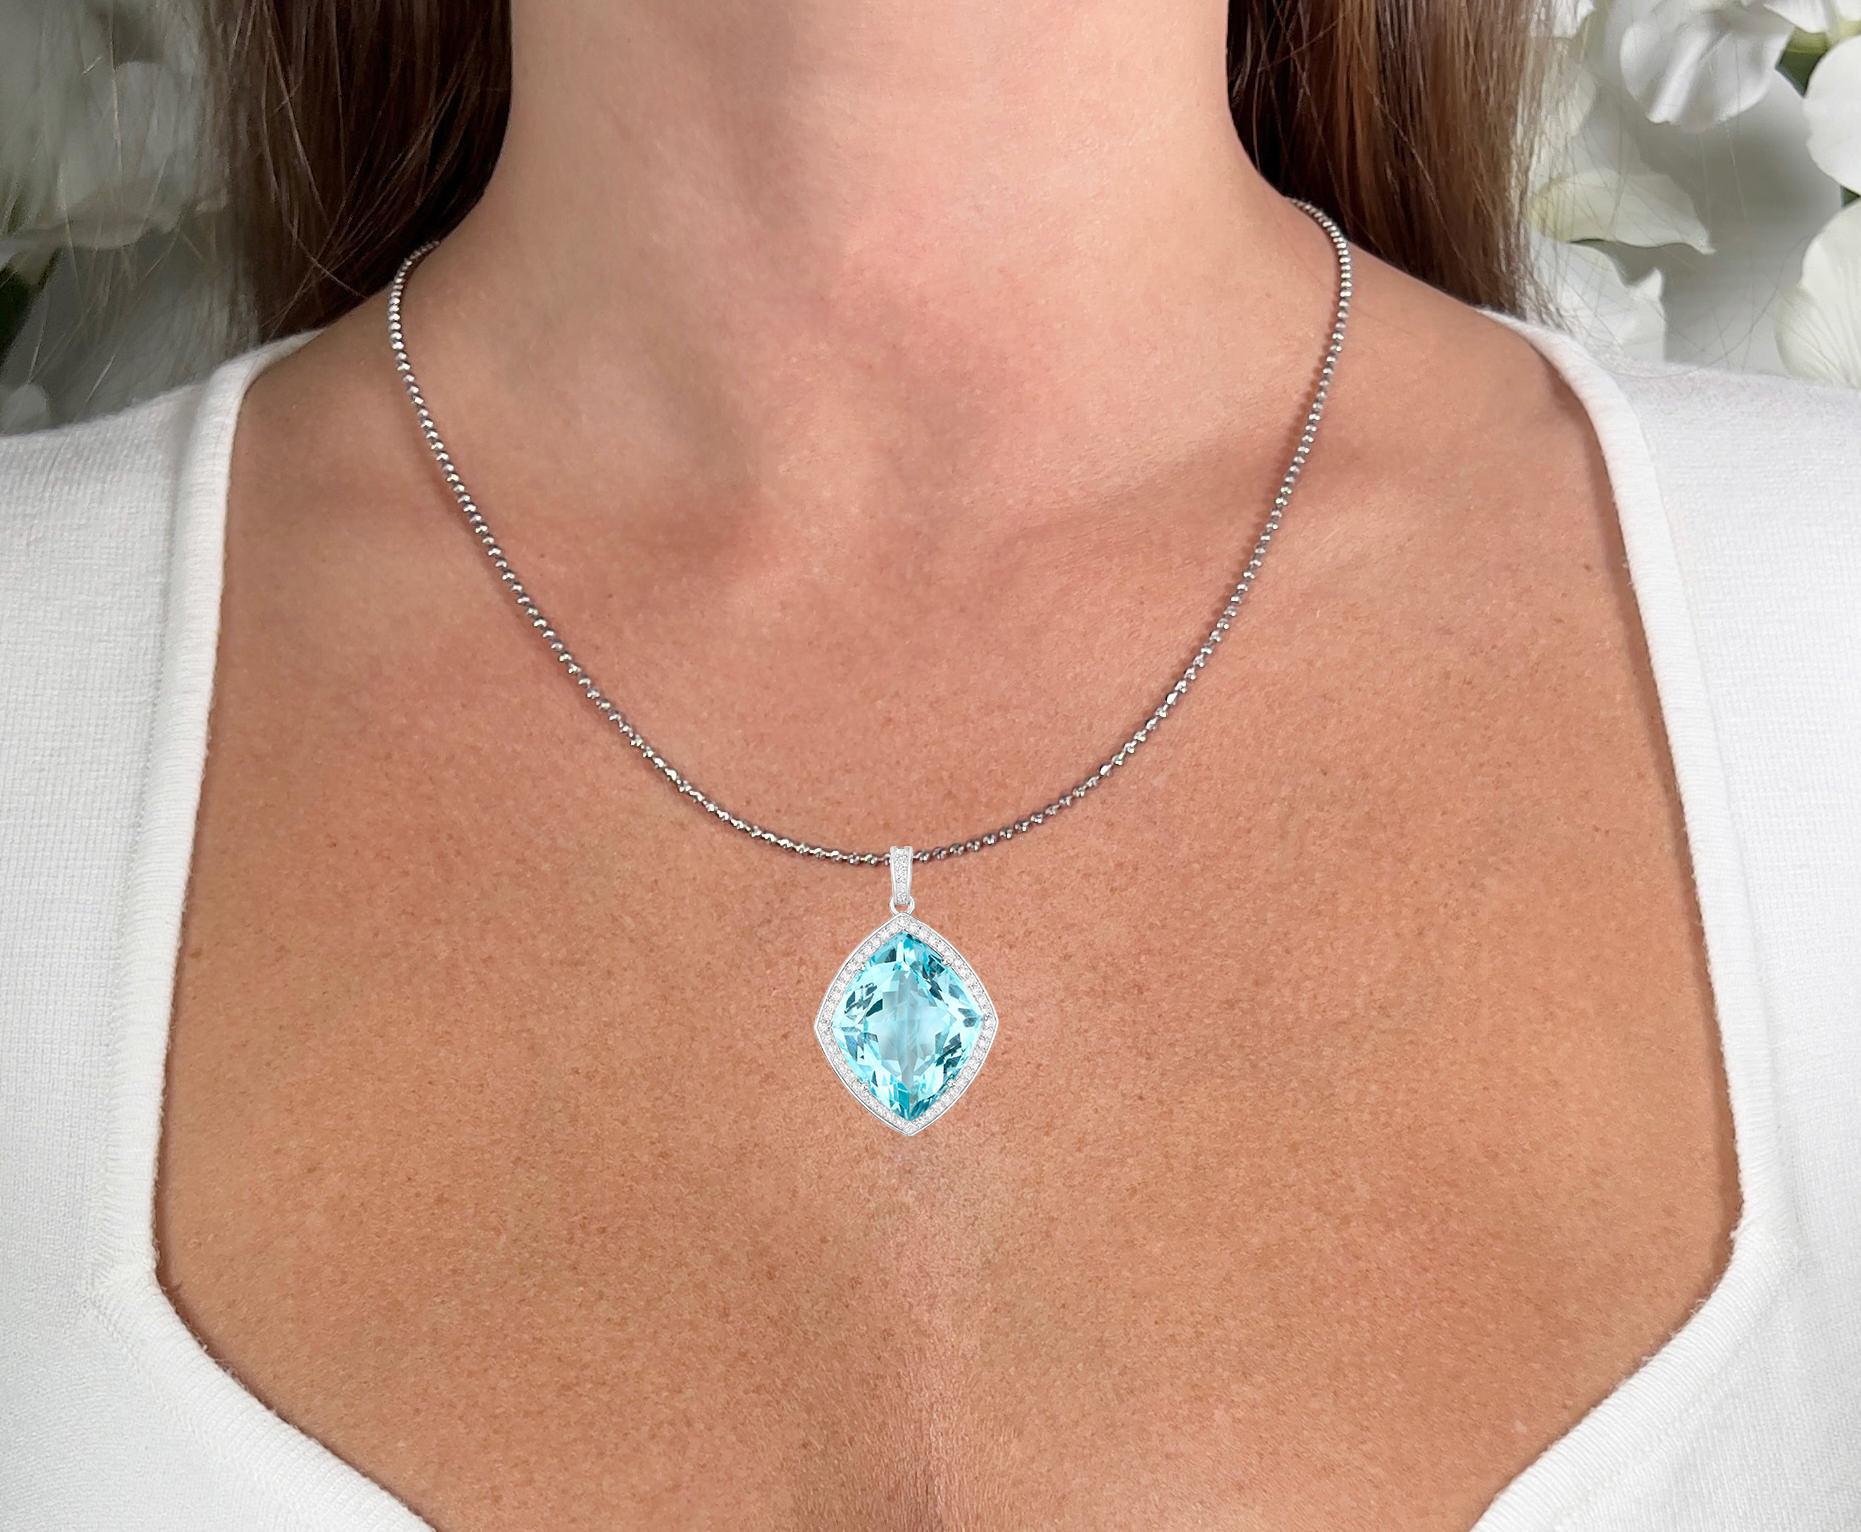 It comes with the Gemological Appraisal by GIA GG/AJP
All Gemstones are Natural
Aquamarine = 23.68 Carat
Diamonds = 0.54 Carats
Metal: 14K White Gold
Pendant Dimensions: 38 x 24 mm
